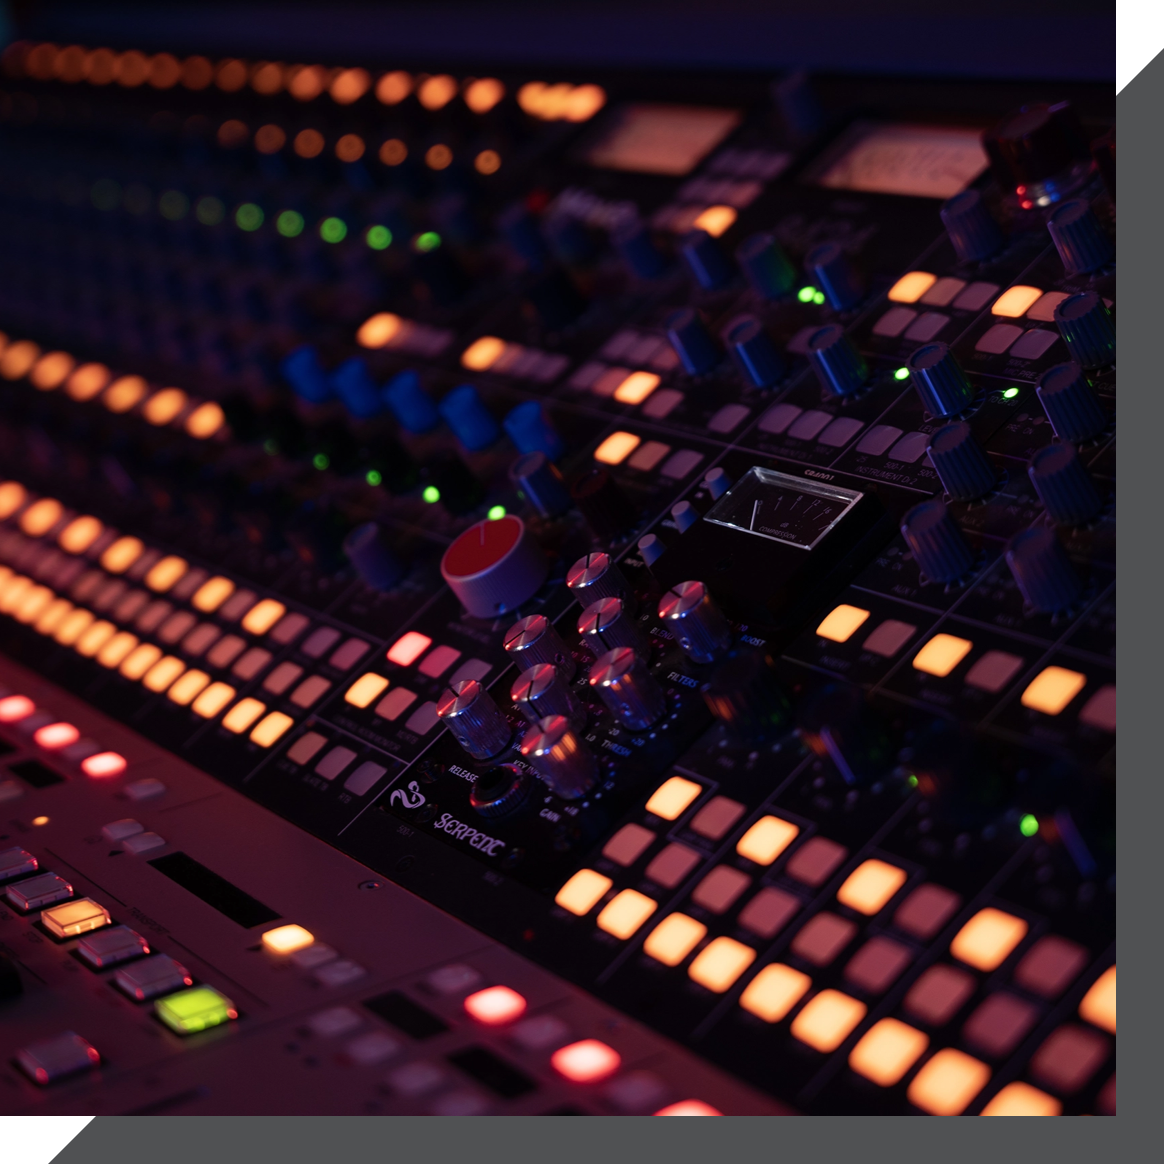 Close-up of a professional audio mixing console in a dimly lit recording studio in London. The console features numerous knobs, buttons, and sliders, all illuminated with various colored lights. The lights create a vibrant, visually striking effect.